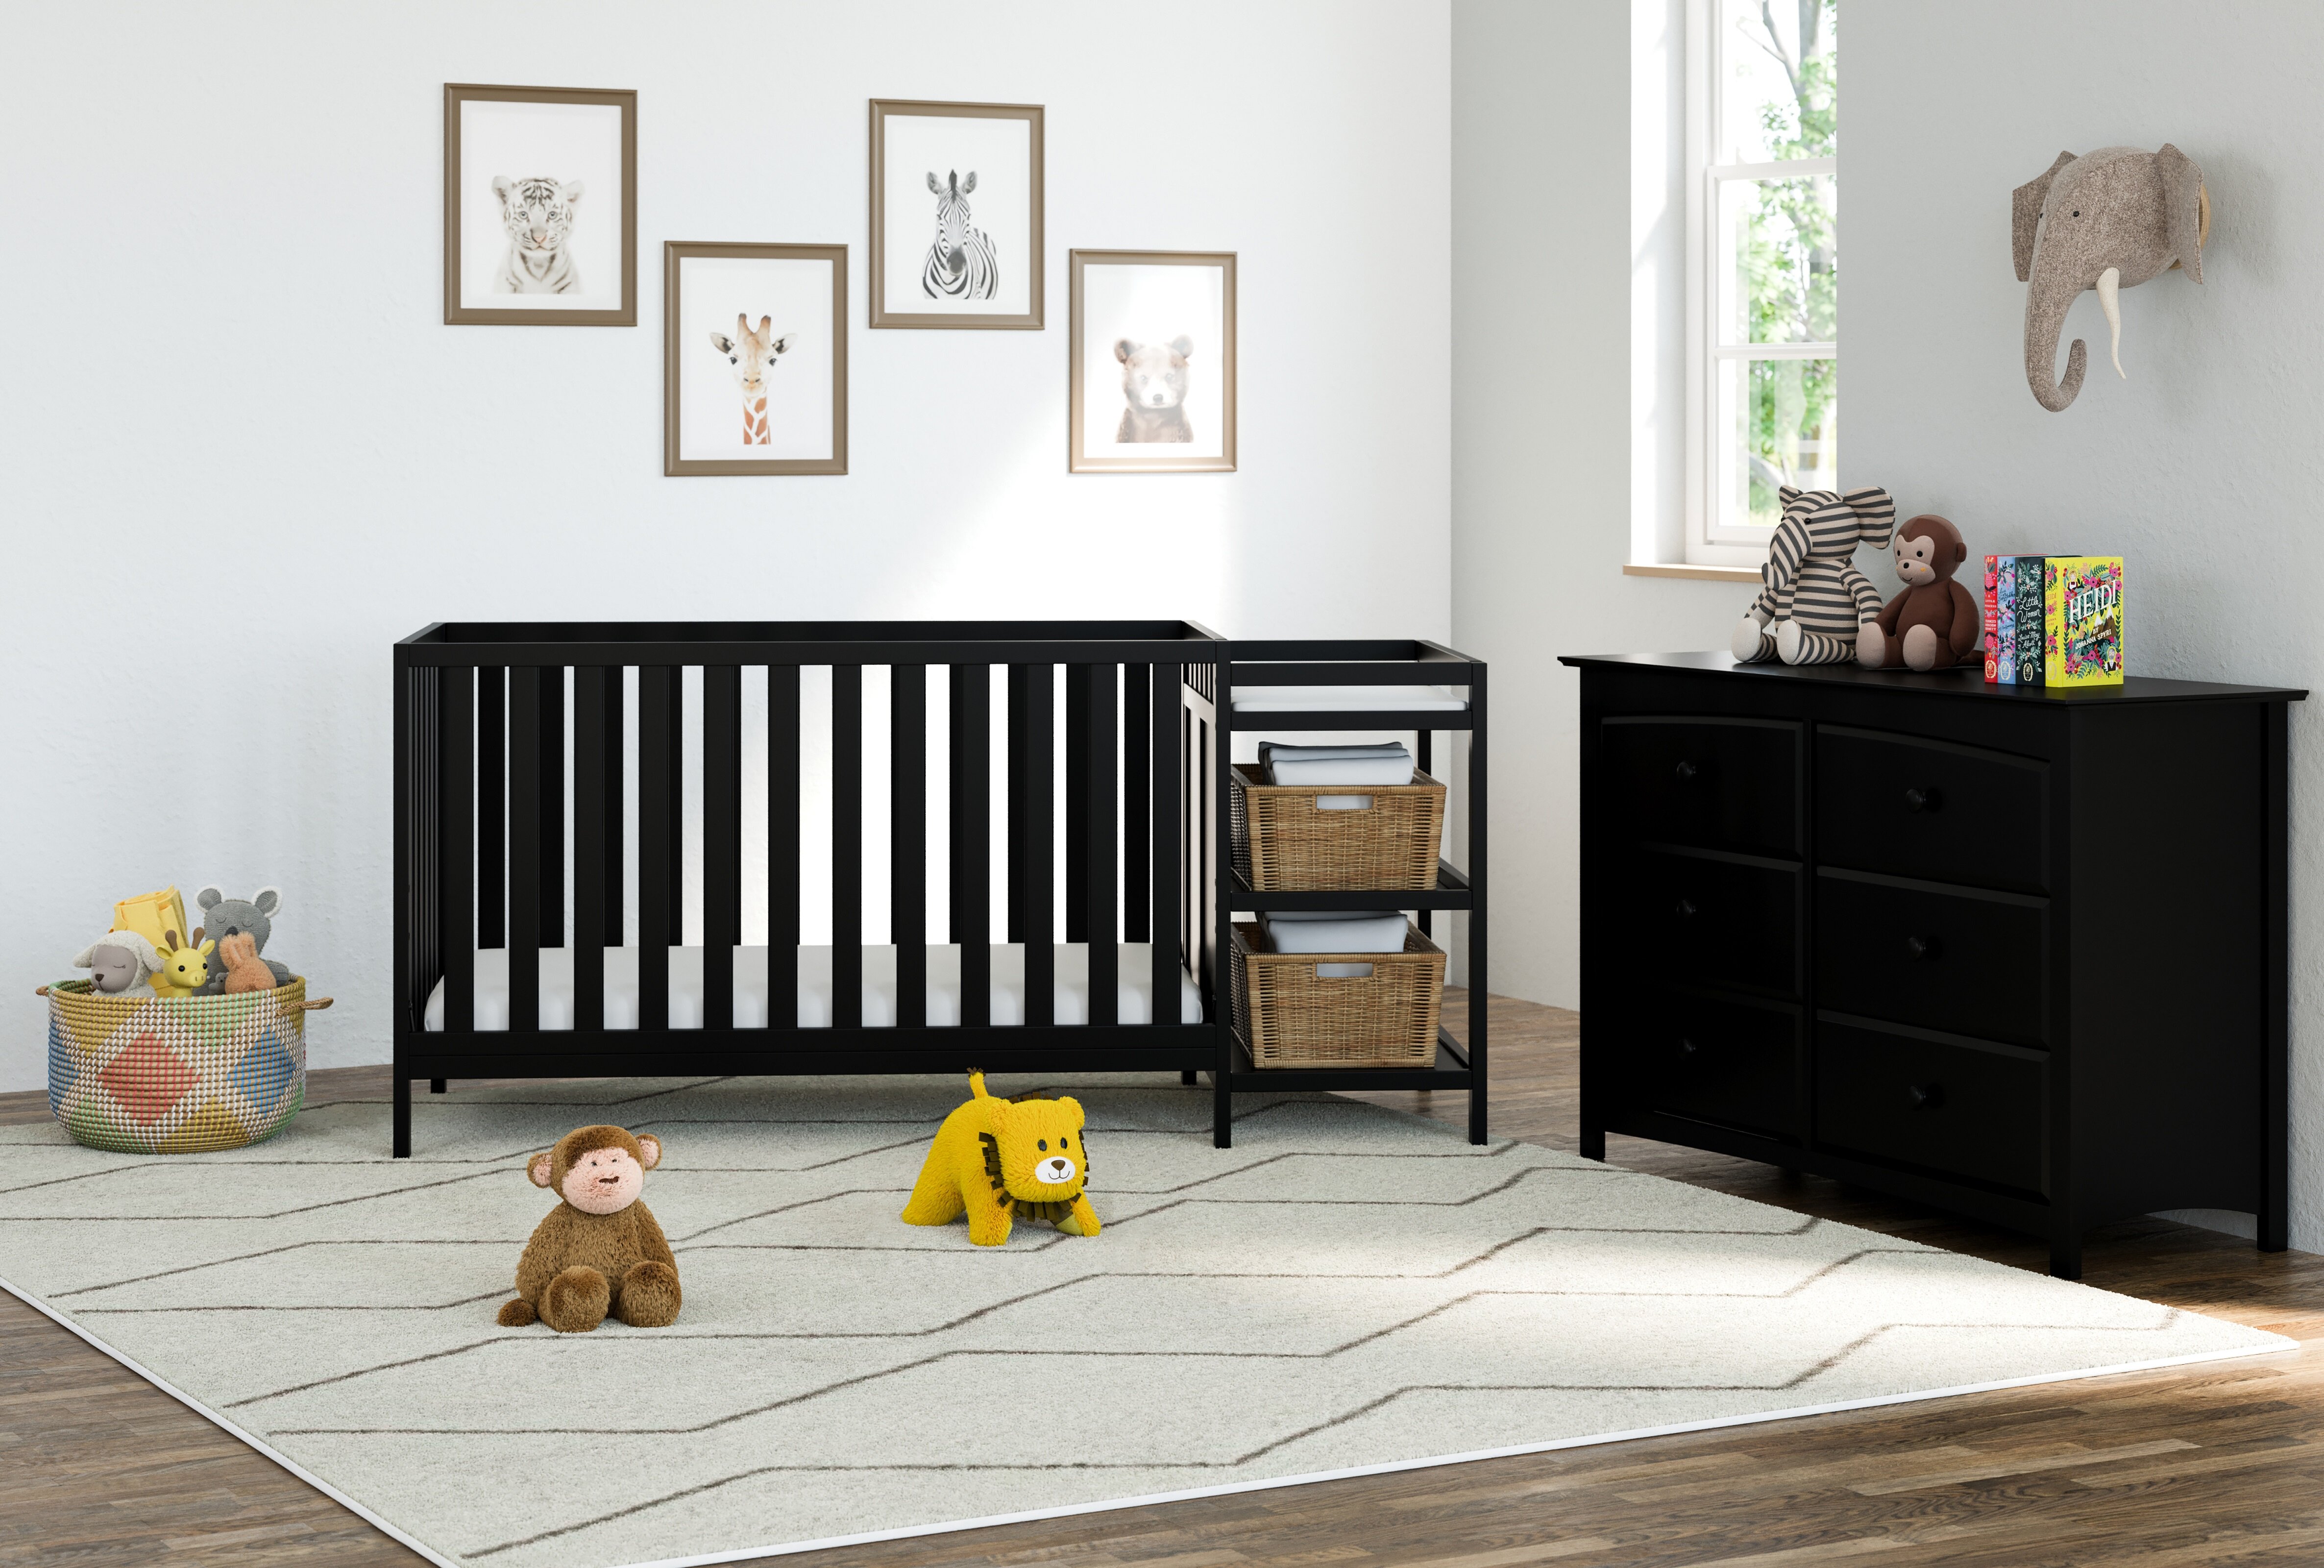 Storkcraft Pacific Convertible Standard Crib And Changer Combo 2